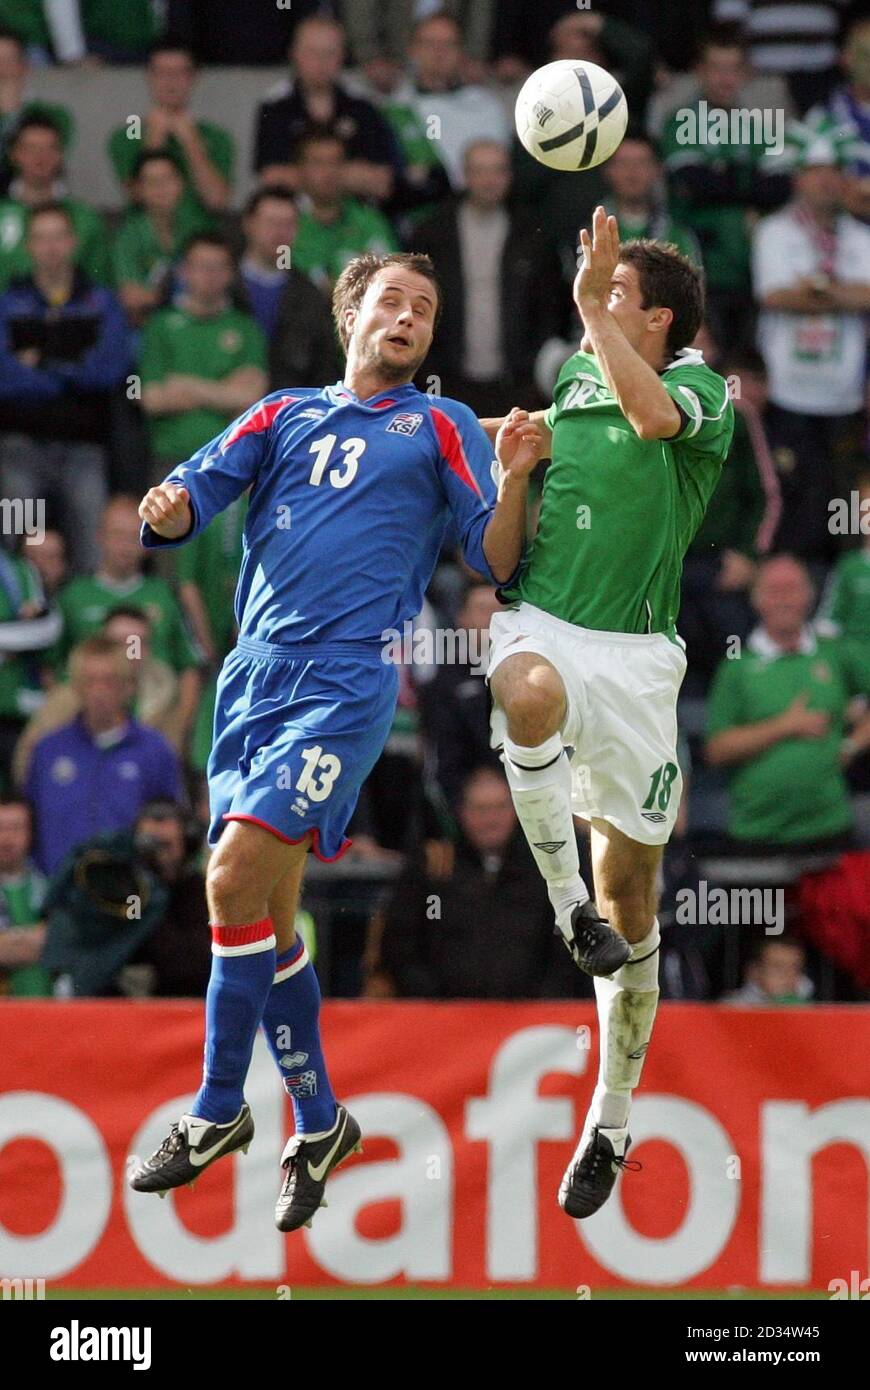 Northern Ireland's captain Aaron Hughes (right) clashes heavily with Iceland's Helgi Valur Danielsson during the European Championship qualifying match at Windsor Park, Belfast. Stock Photo